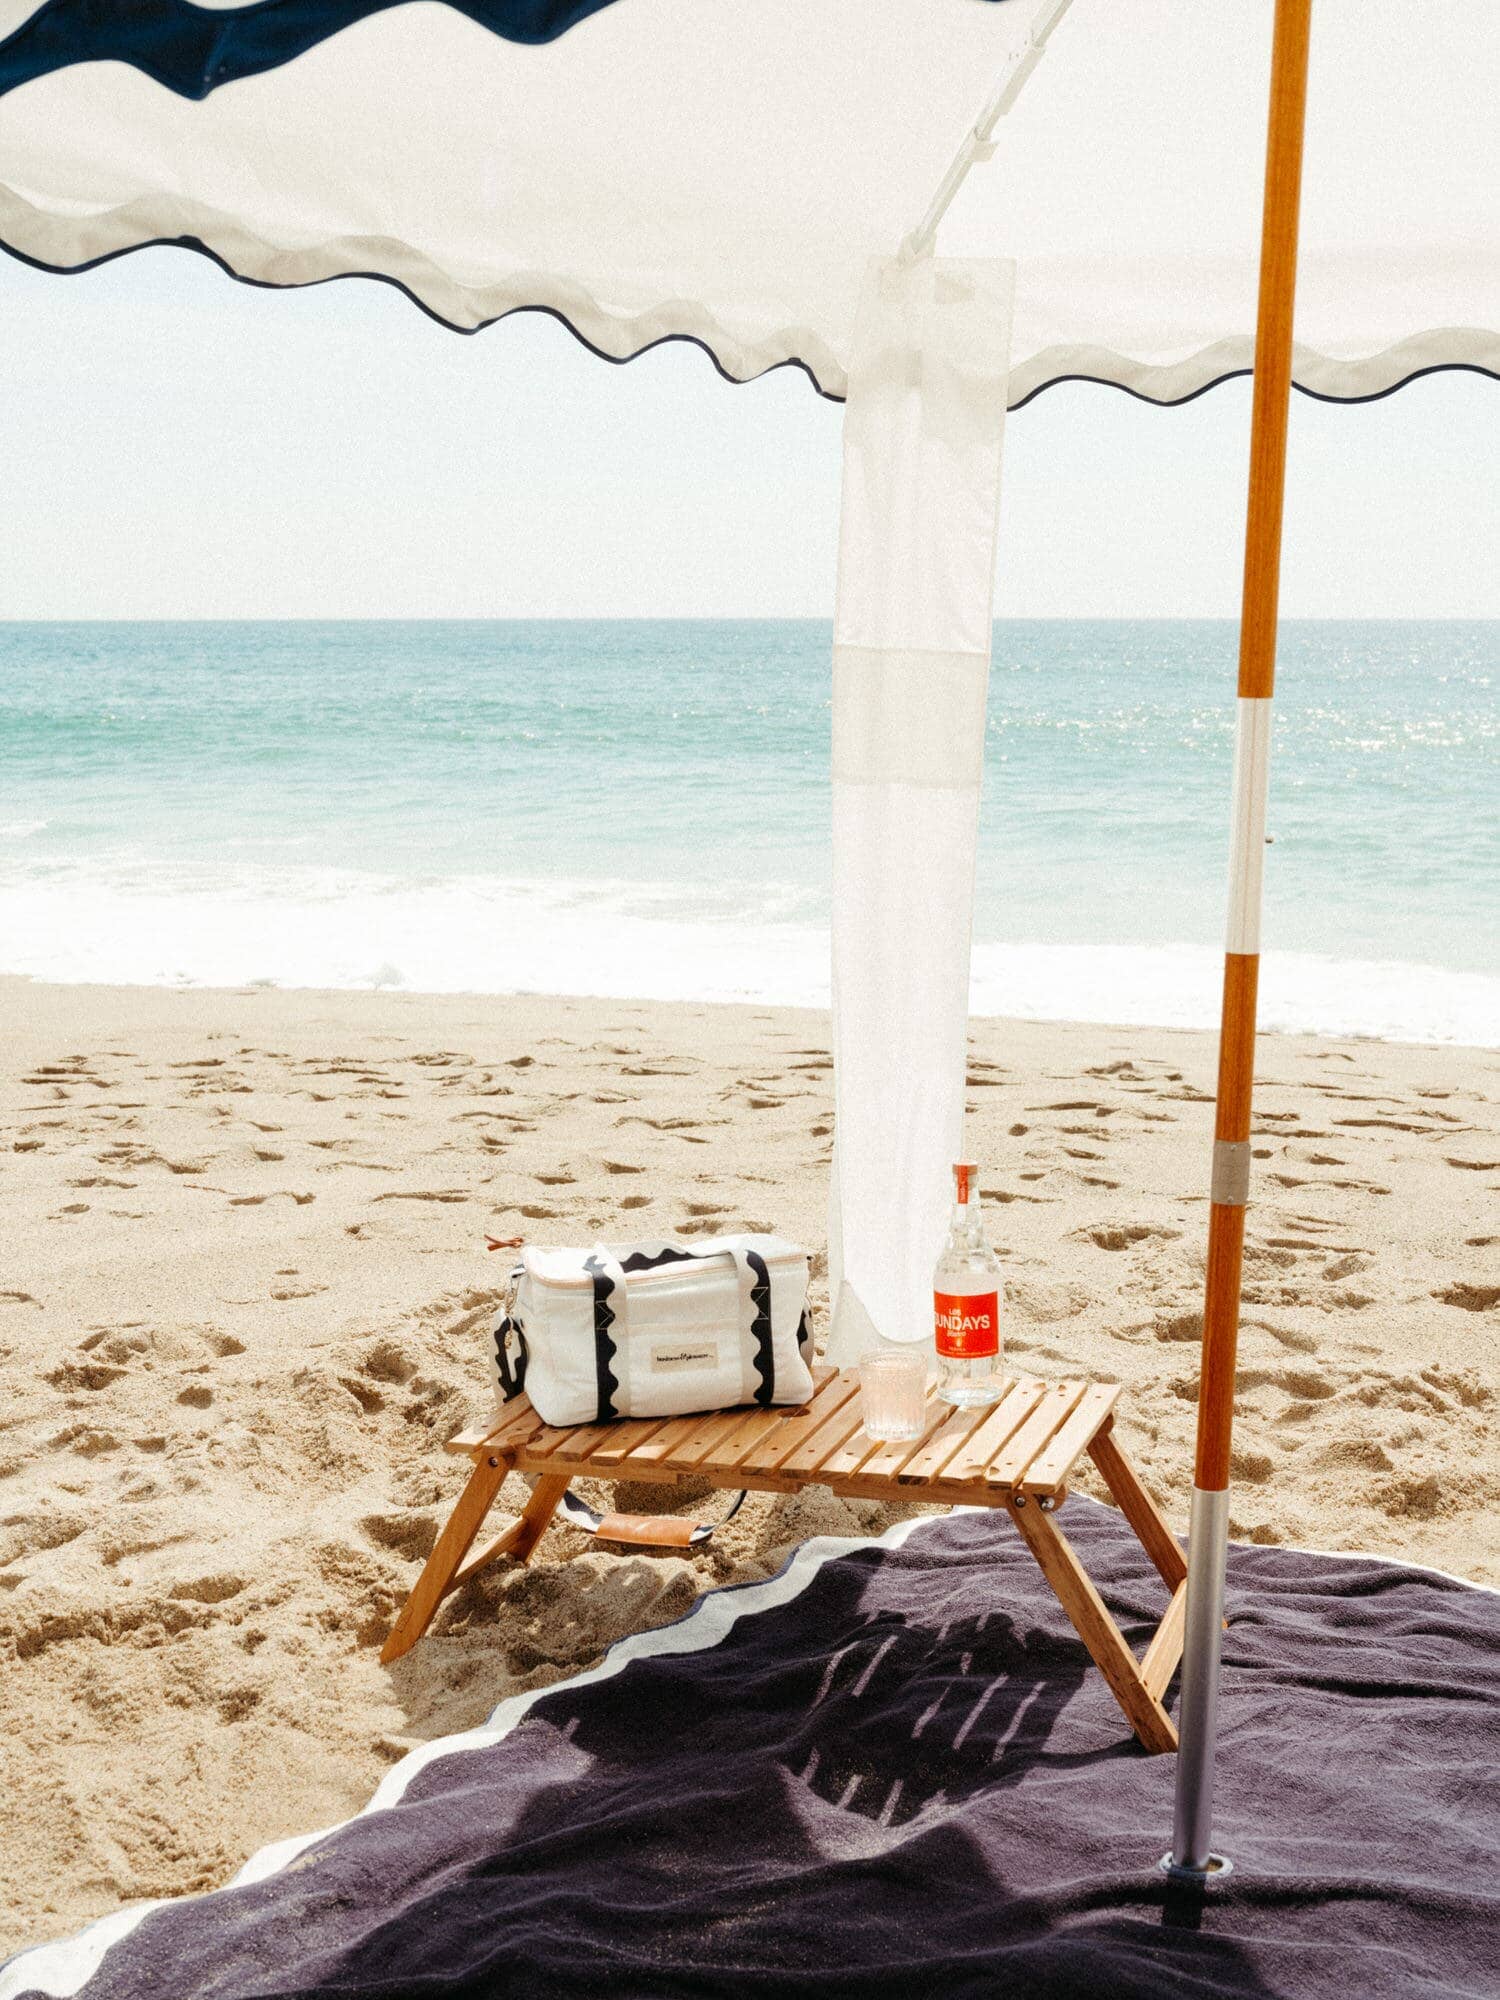 riviera white blanket, cabana, cooler and table on the beach